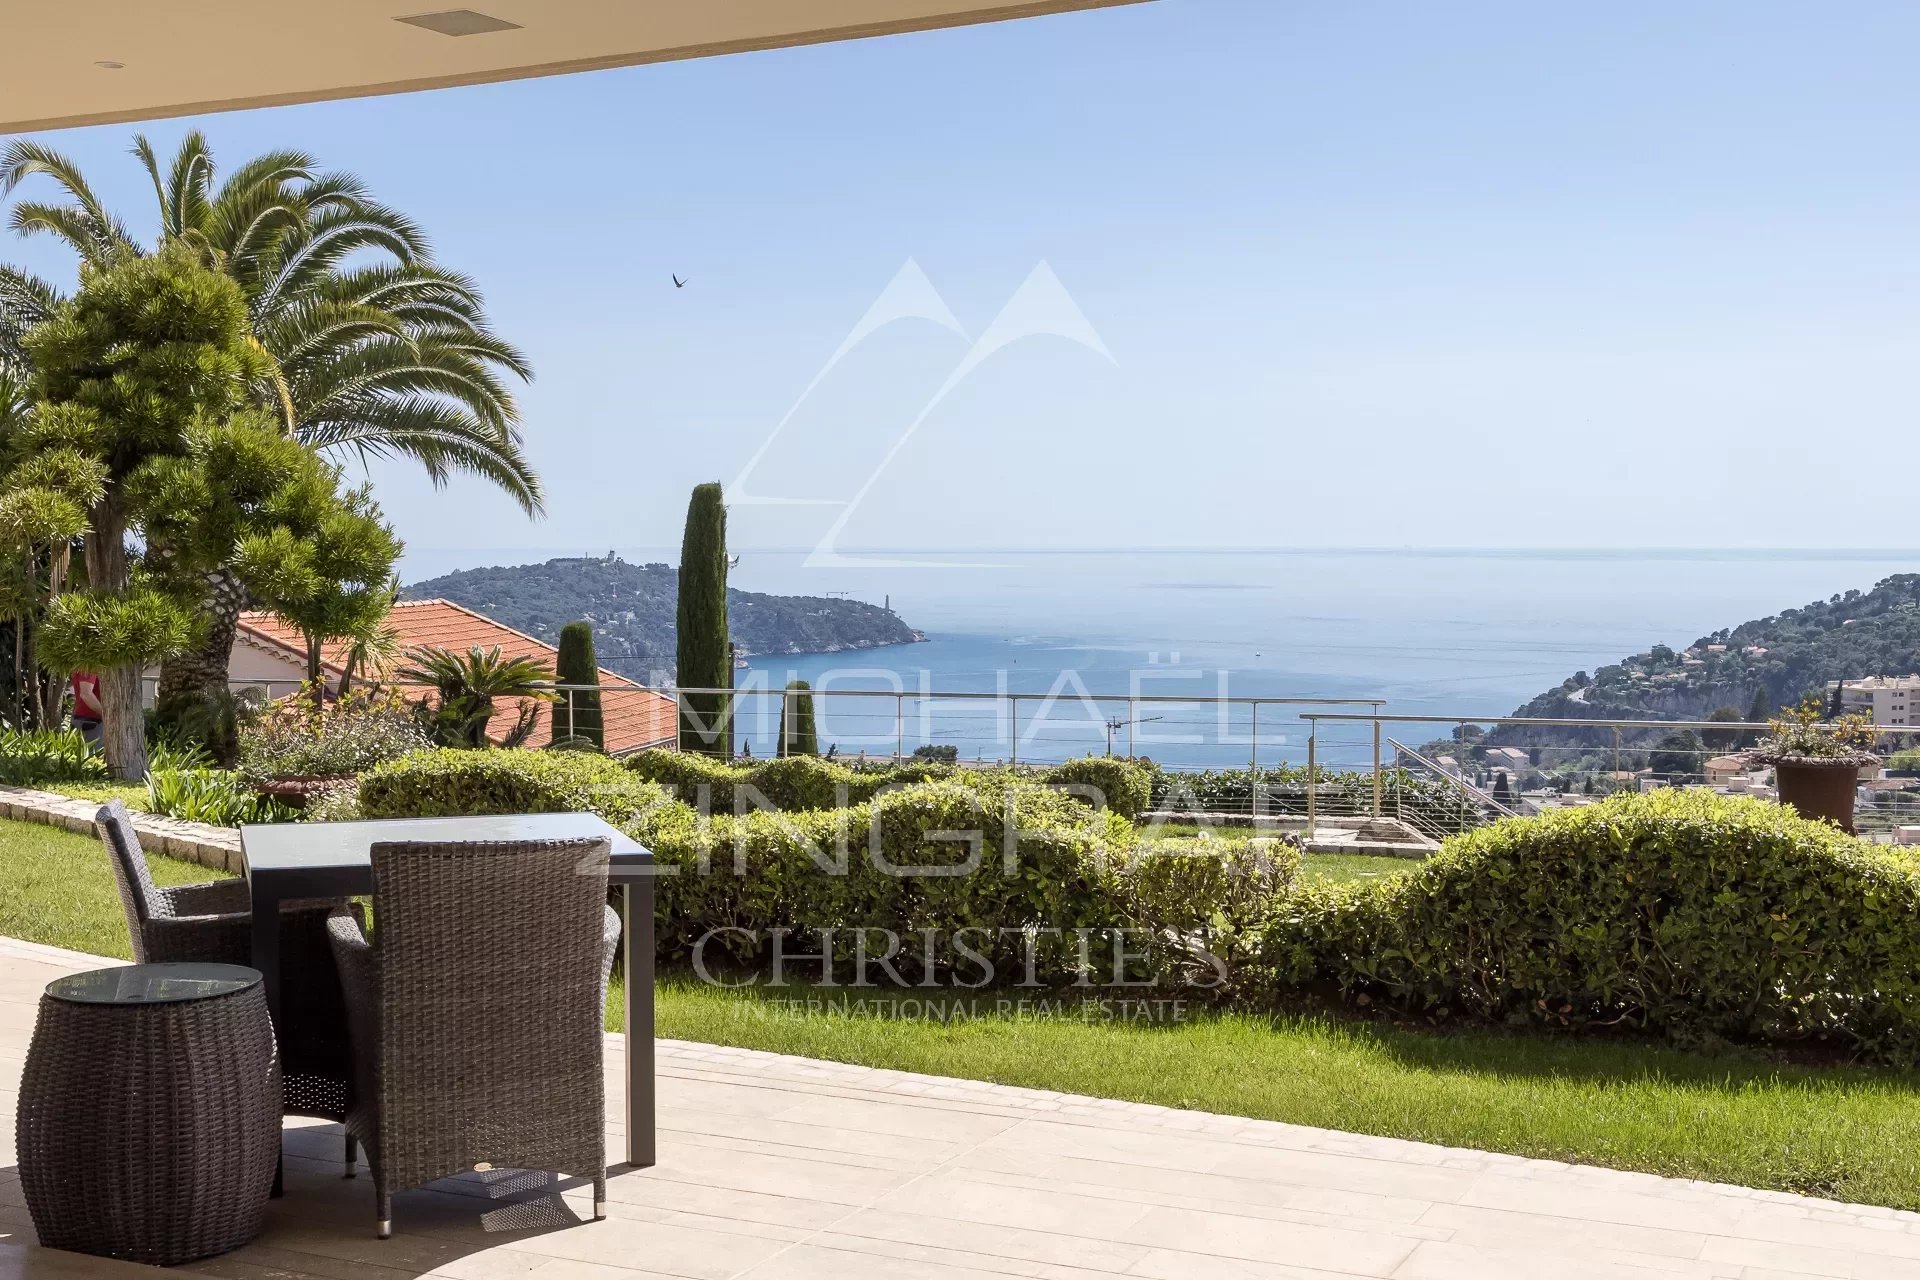 Col de Villefranche-sur-Mer - Large modern property with panoramic sea view over the bay of Villefranche and Cap Ferrat